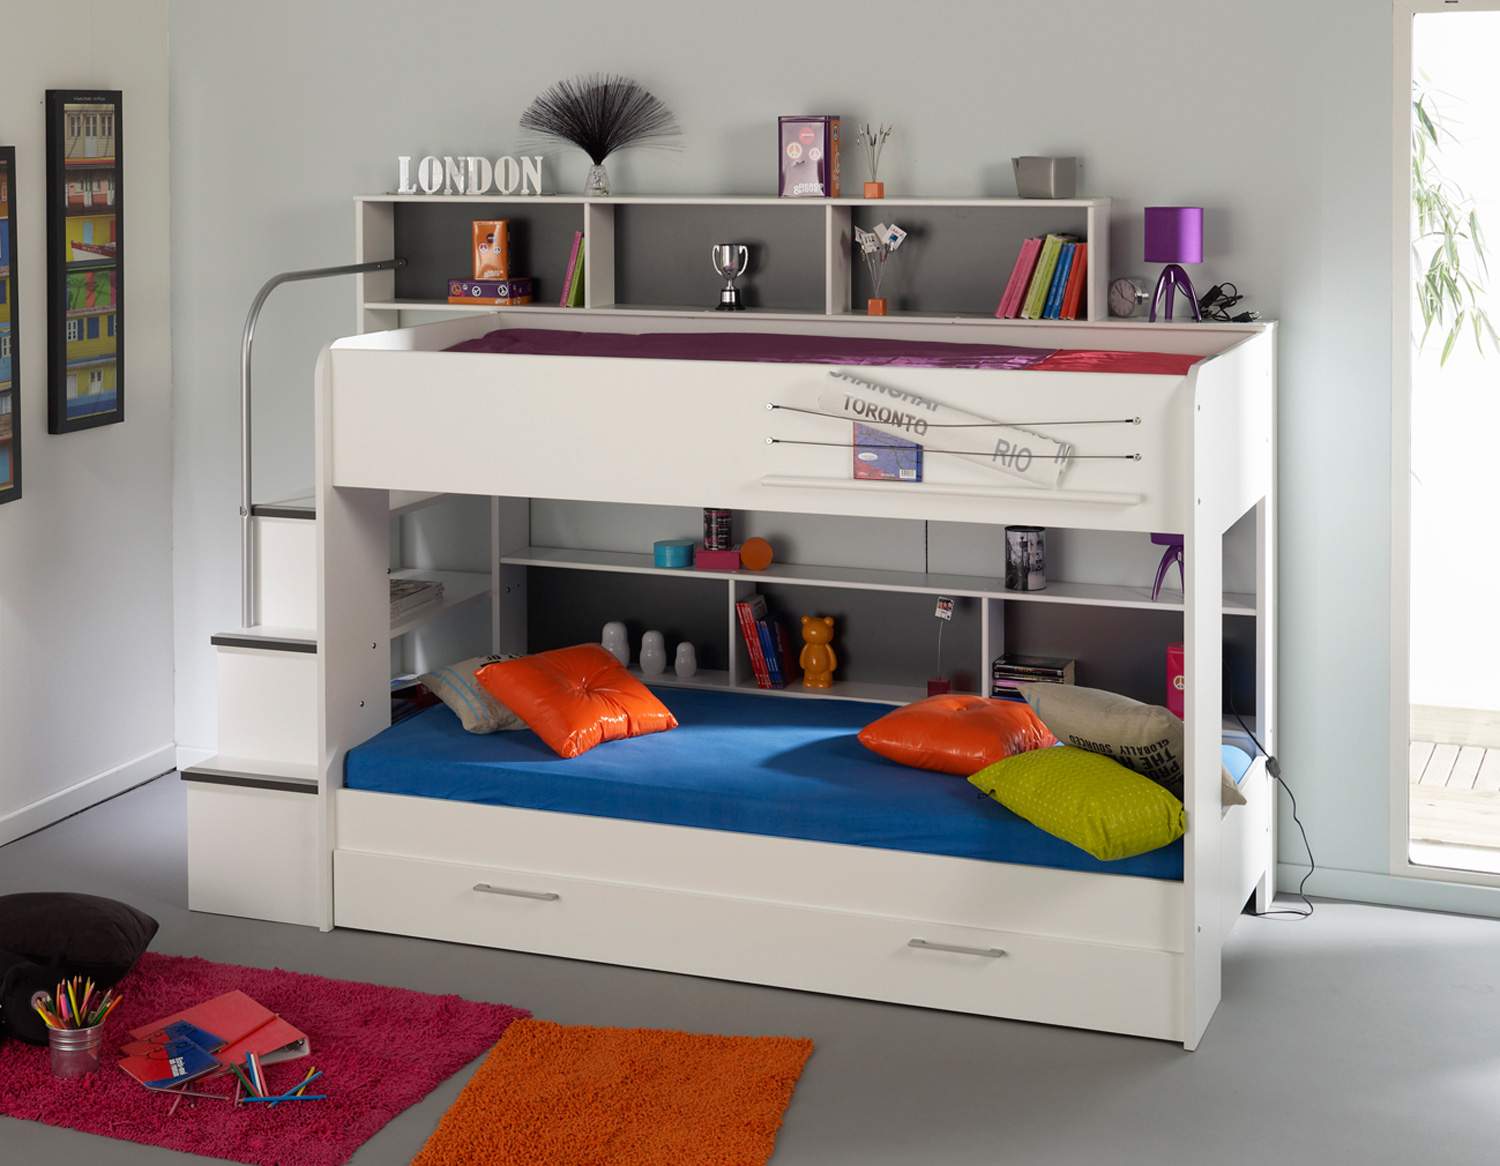 Beautiful-low-white-space-saving-bunk-bed-design-inspiration-with-hidden-drawer-and-bookshelf-above-for-small-kids-room-fascinate-Bunk-Beds-for-small-children-with-a-space-saving-concept